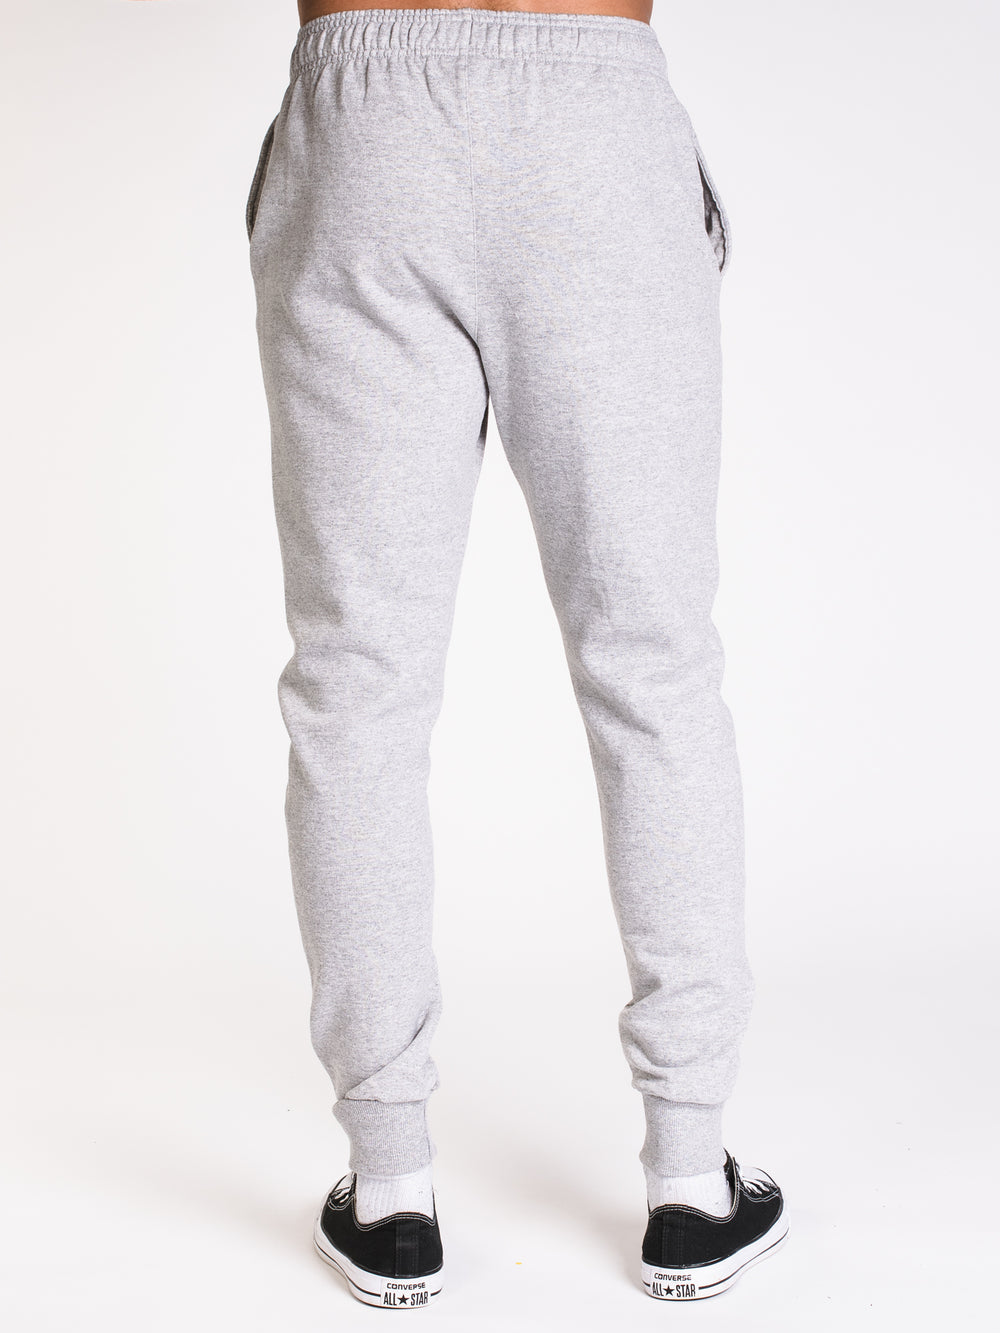 MENS POWERBLEND SCRIPT JOGGER-GY - CLEARANCE